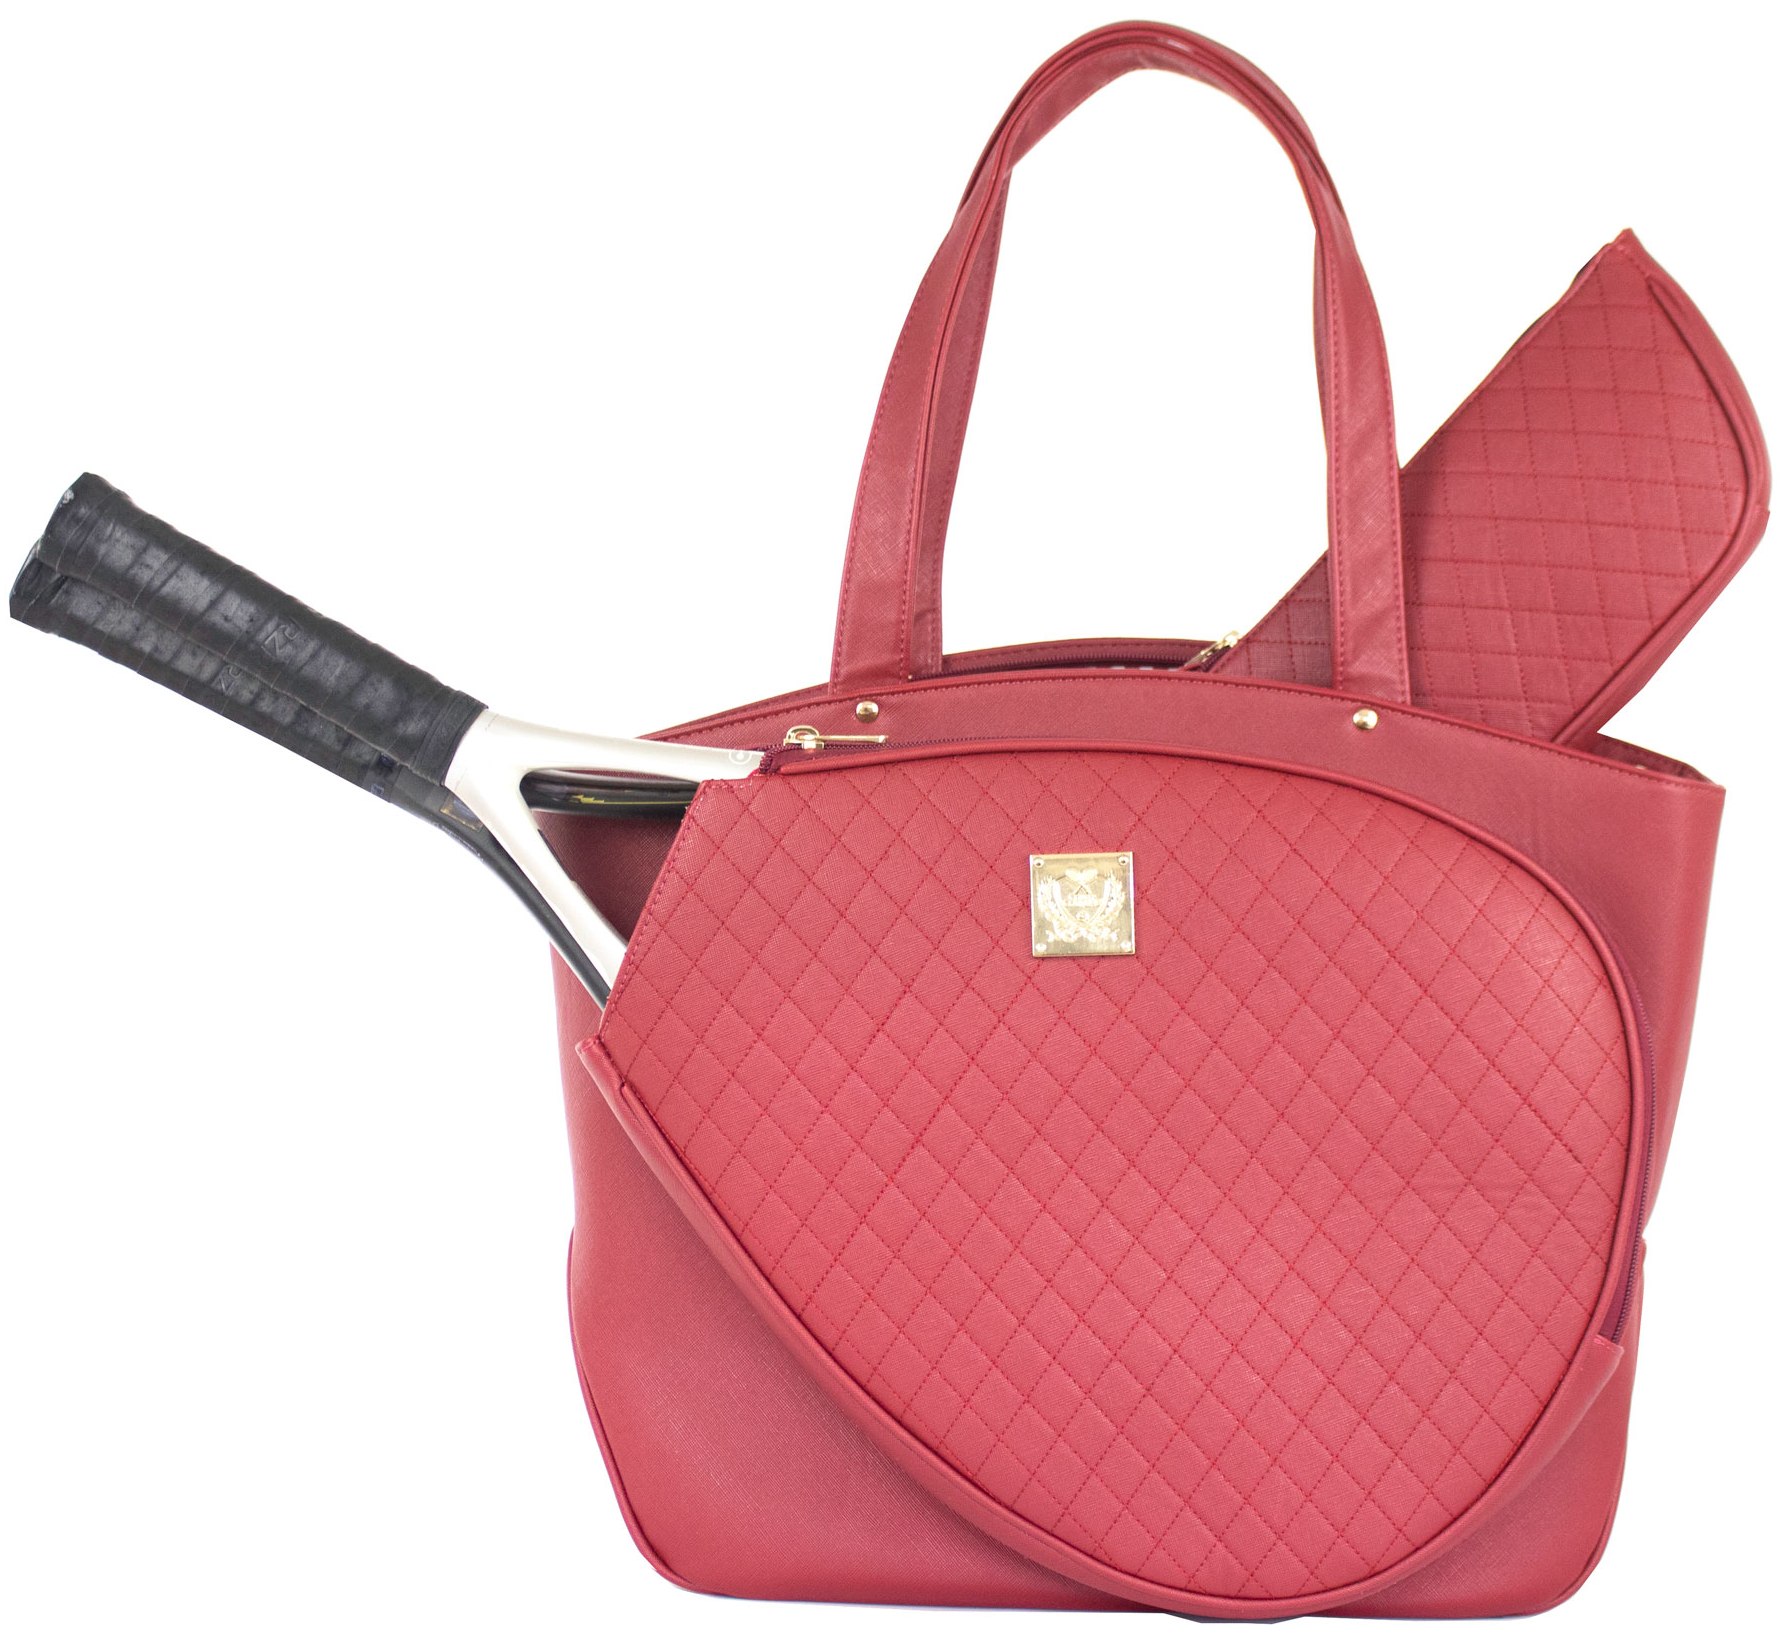 Court Couture Cassanova Tennis Bag (Quilted Ruby)